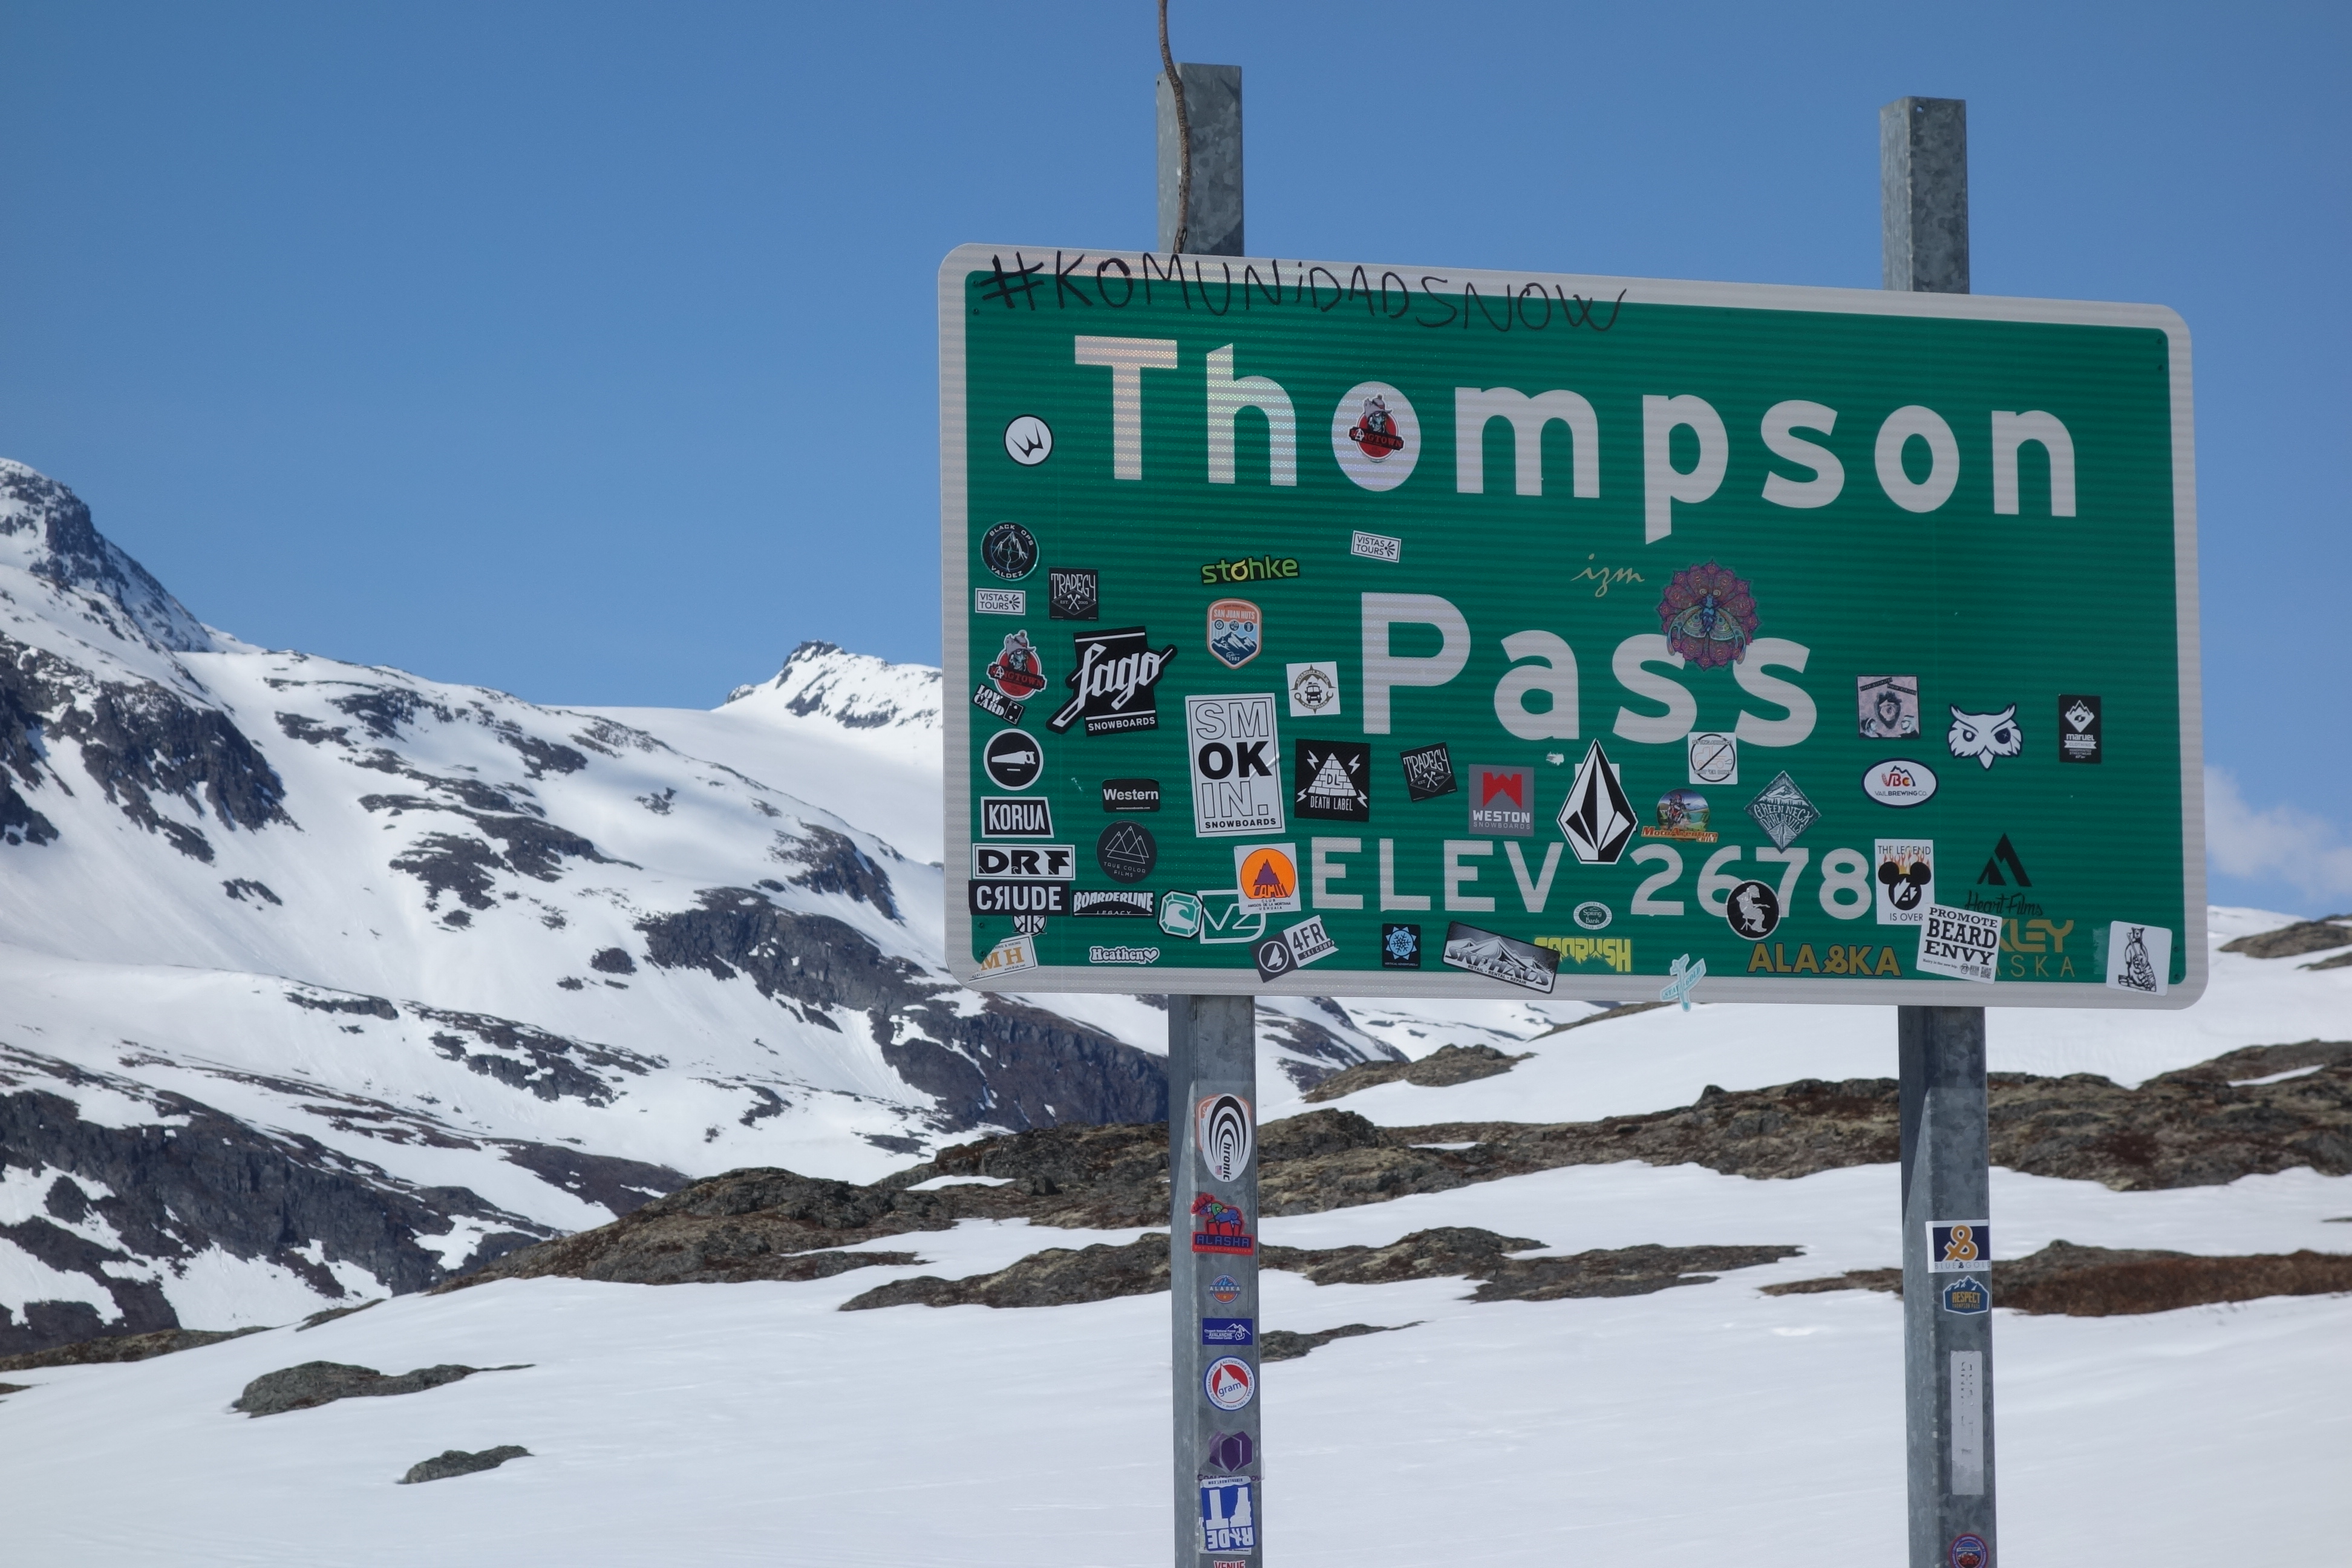 a road sign for Thompson Pass covered with grafitti and stickers, shown in a snowy landscape